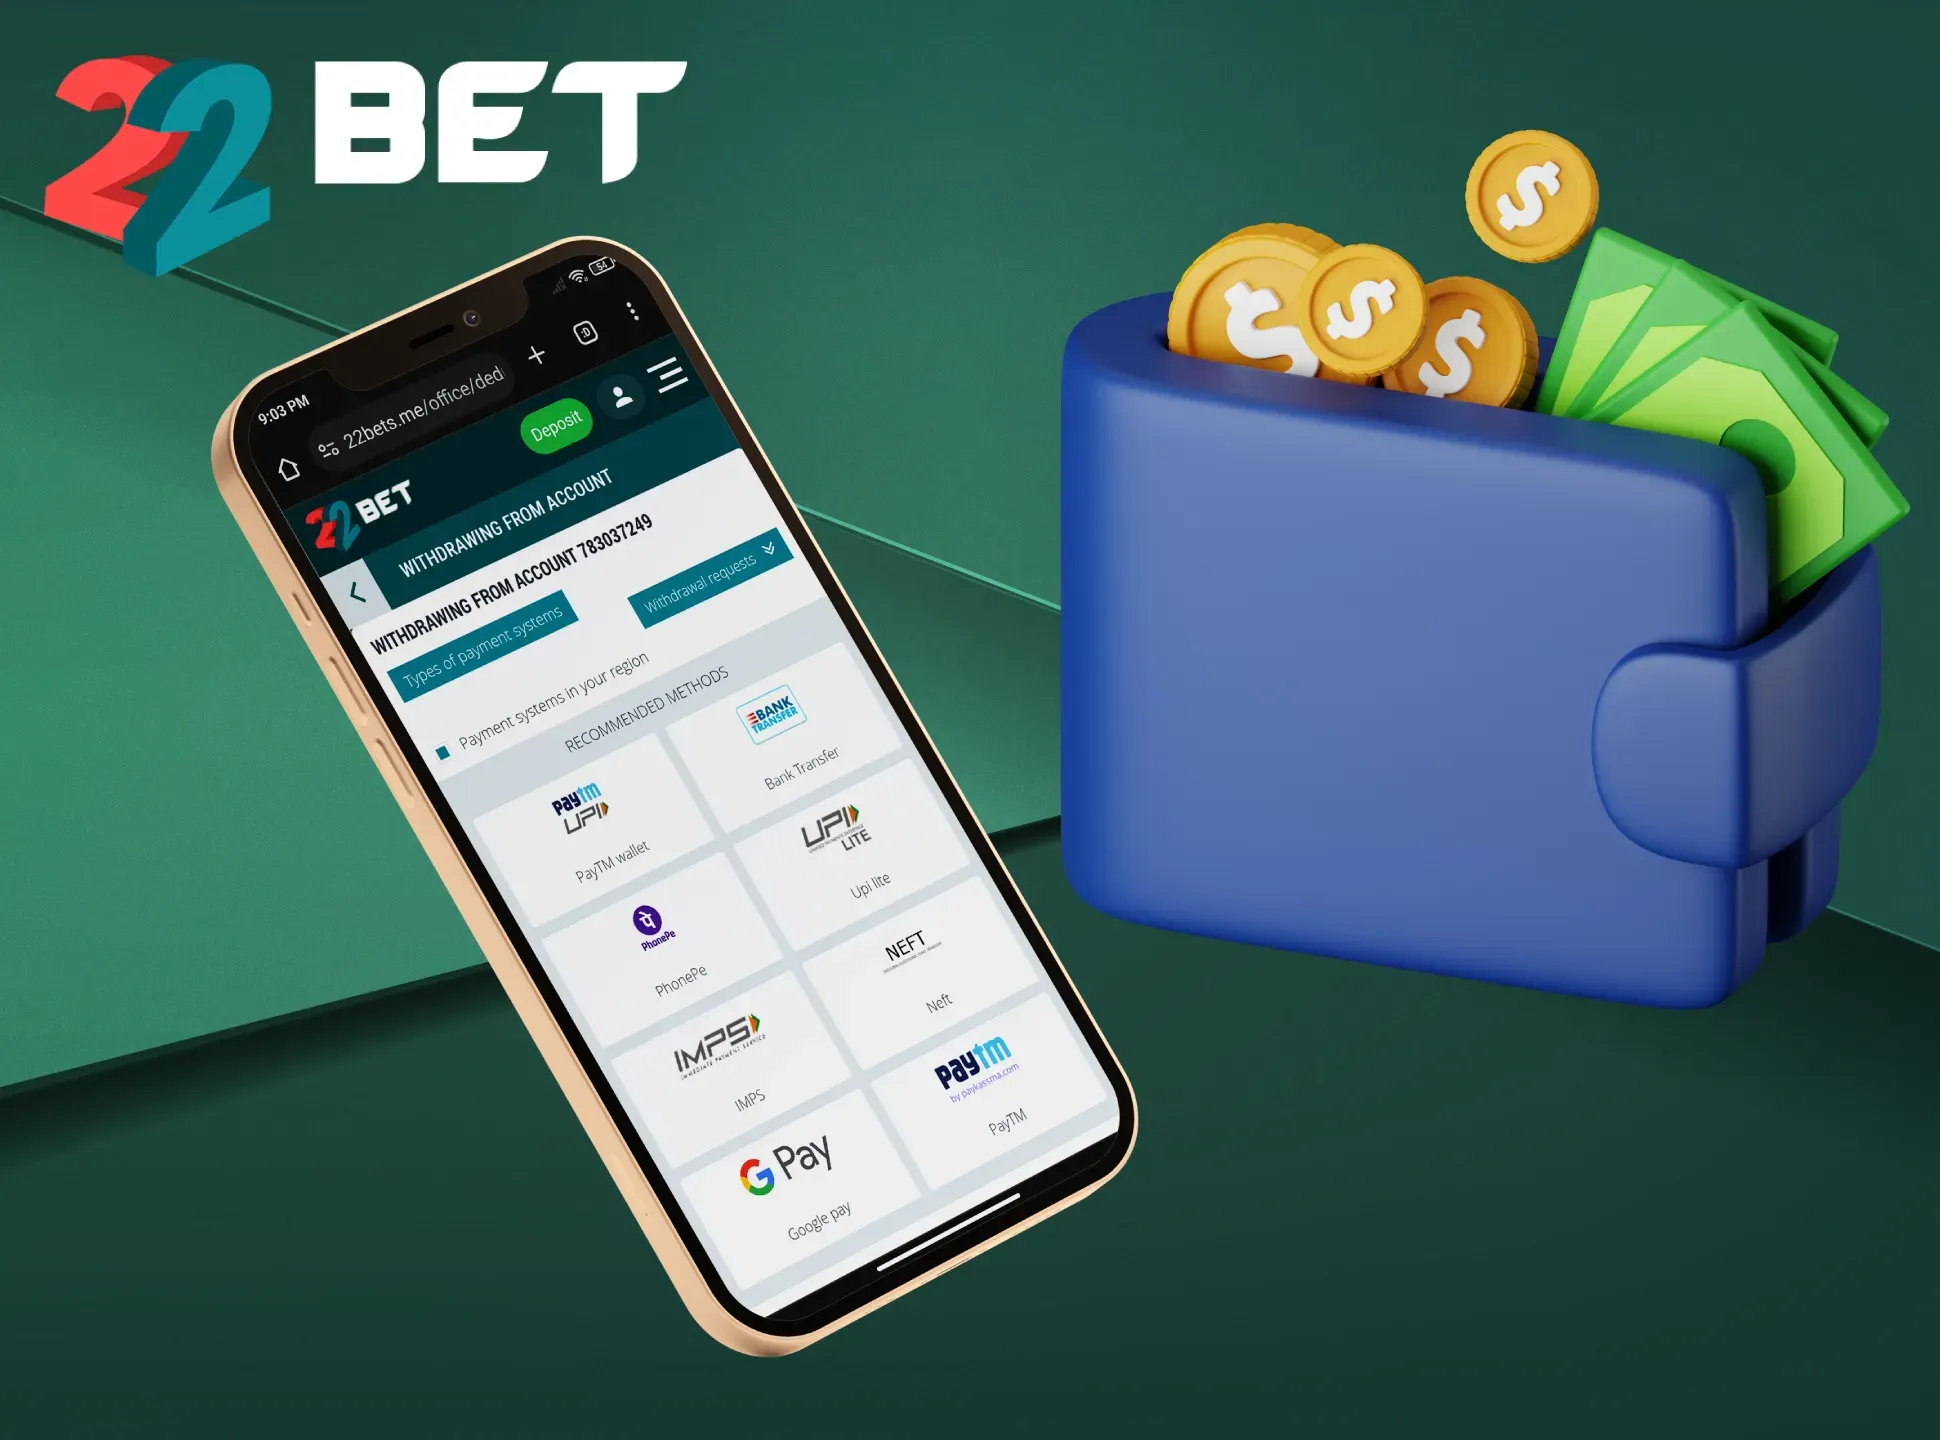 The withdrawal process does not take much time in the 22Bet app.